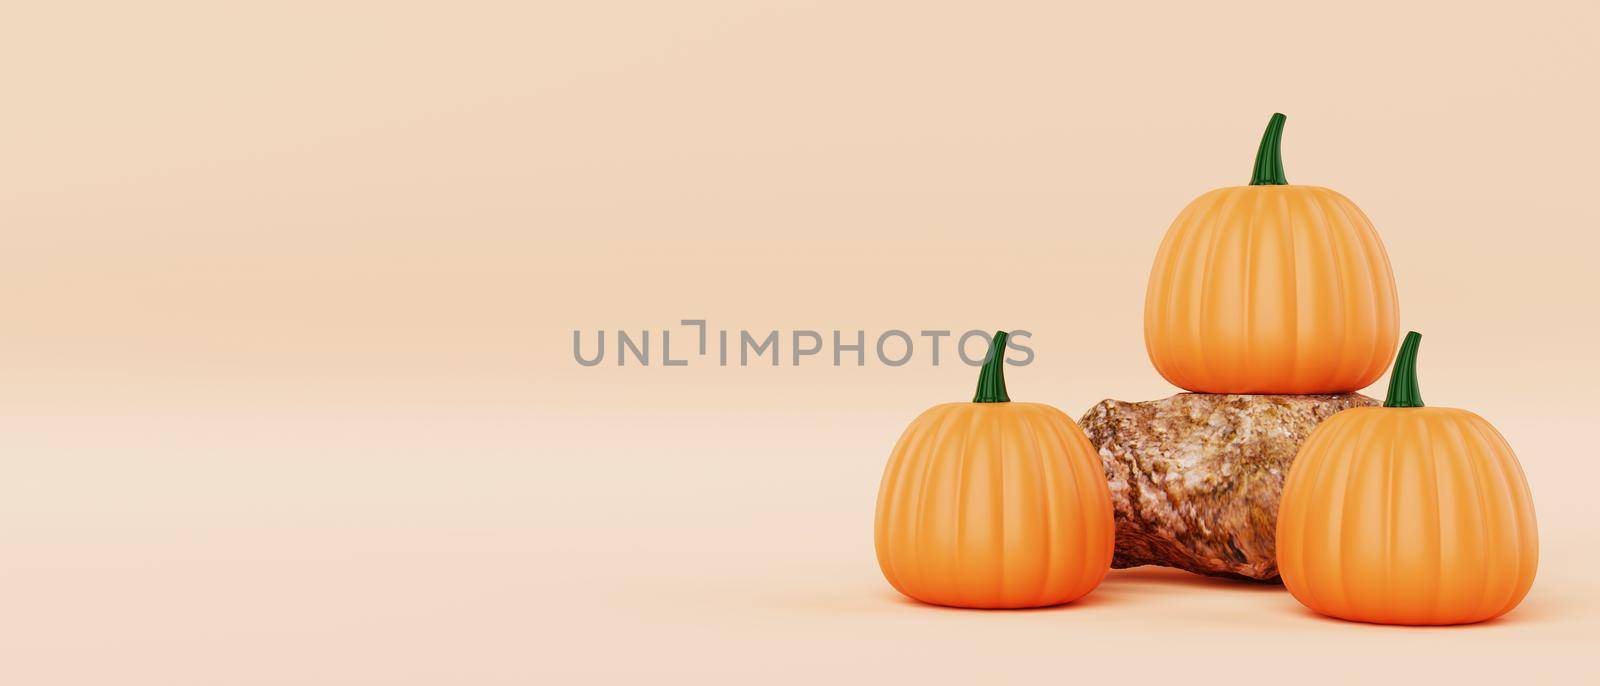 Pumpkins on the rock on orange background. Halloween and vegetable object concept. 3D illustration rendering by MiniStocker